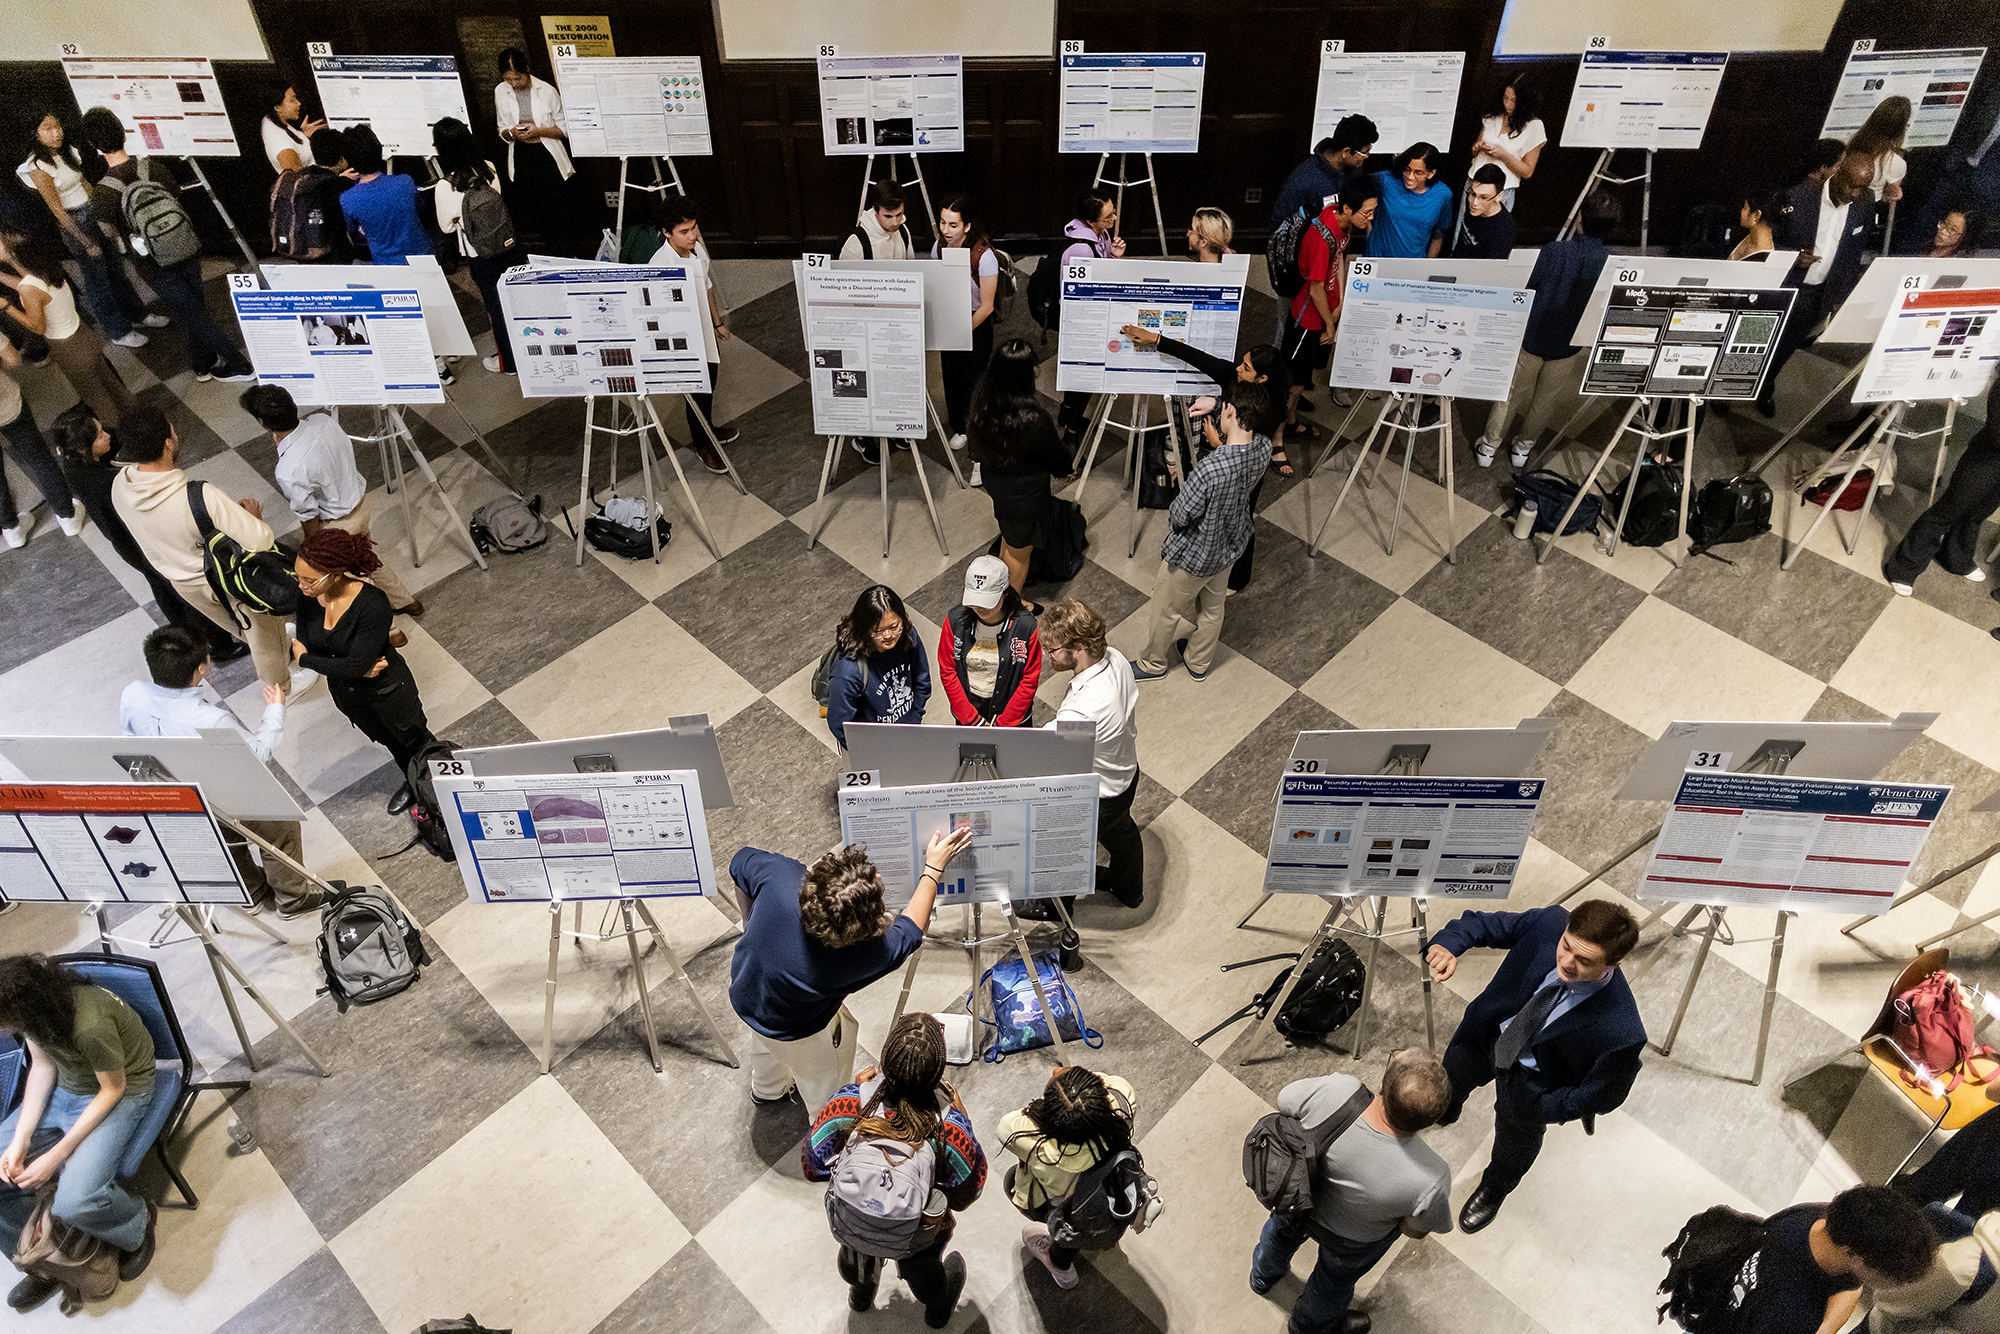 An overhead view of students presenting their posters at the CURF poster expo.